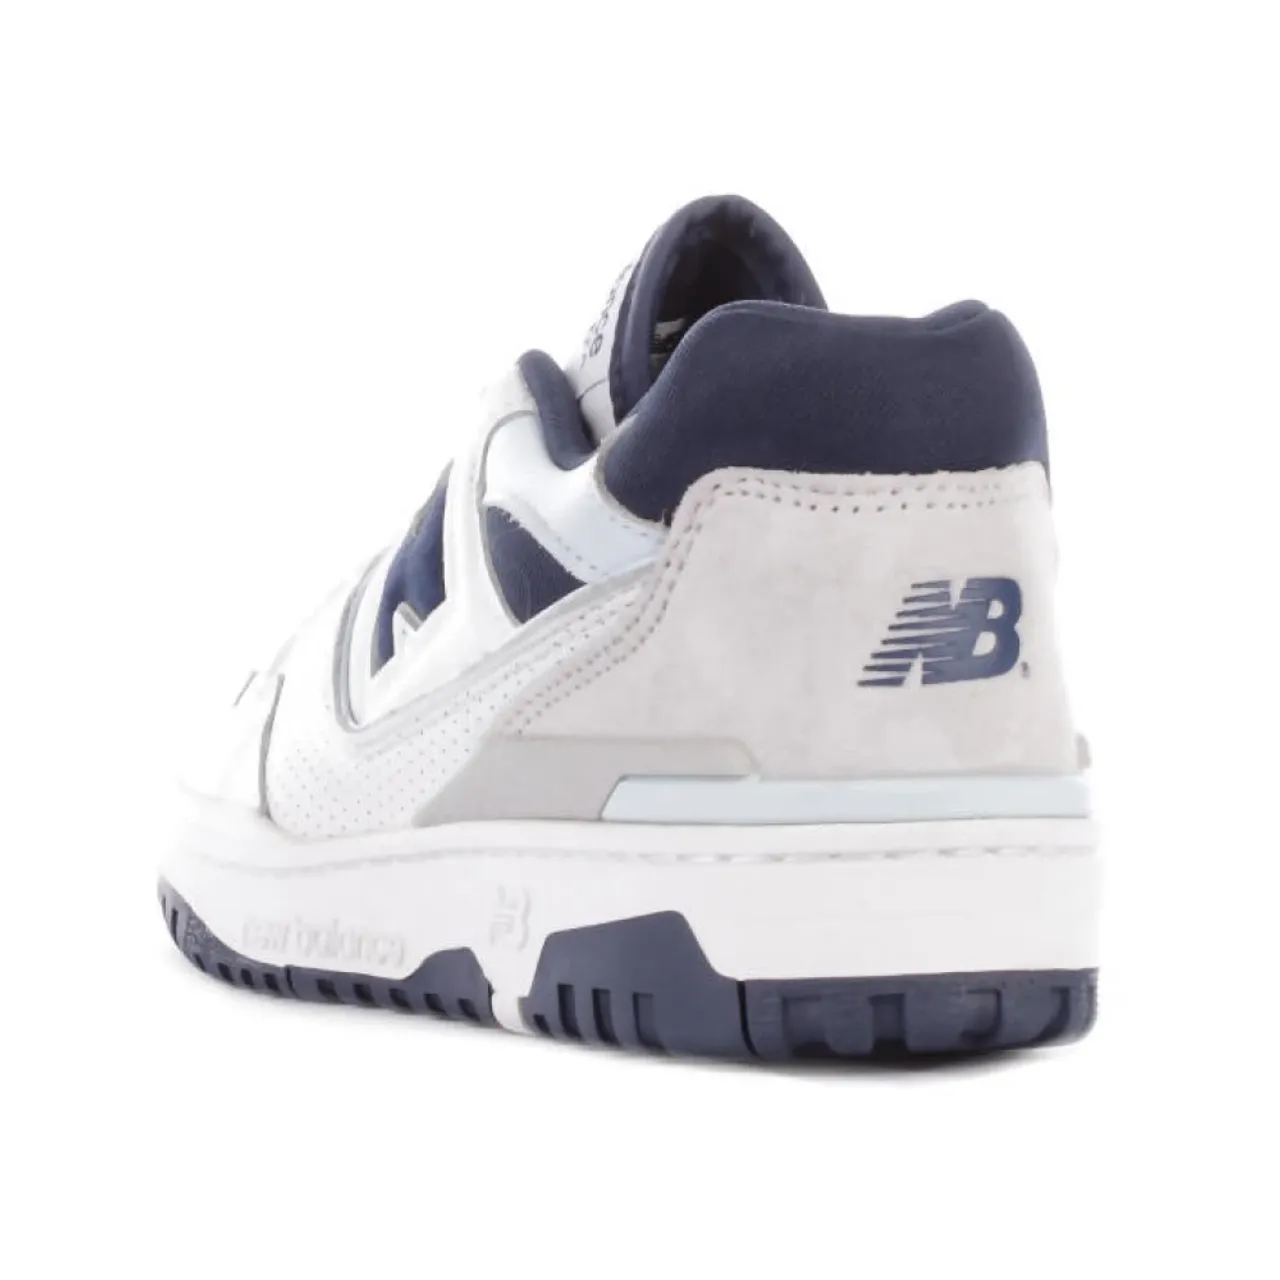 New Balance , White Leather Sneakers ,Multicolor male, Sizes: 9 UK, 7 1/2 UK, 3 UK, 10 1/2 UK, 6 1/2 UK, 4 1/2 UK, 8 UK, 4 UK, 8 1/2 UK, 5 1/2 UK, 6 U